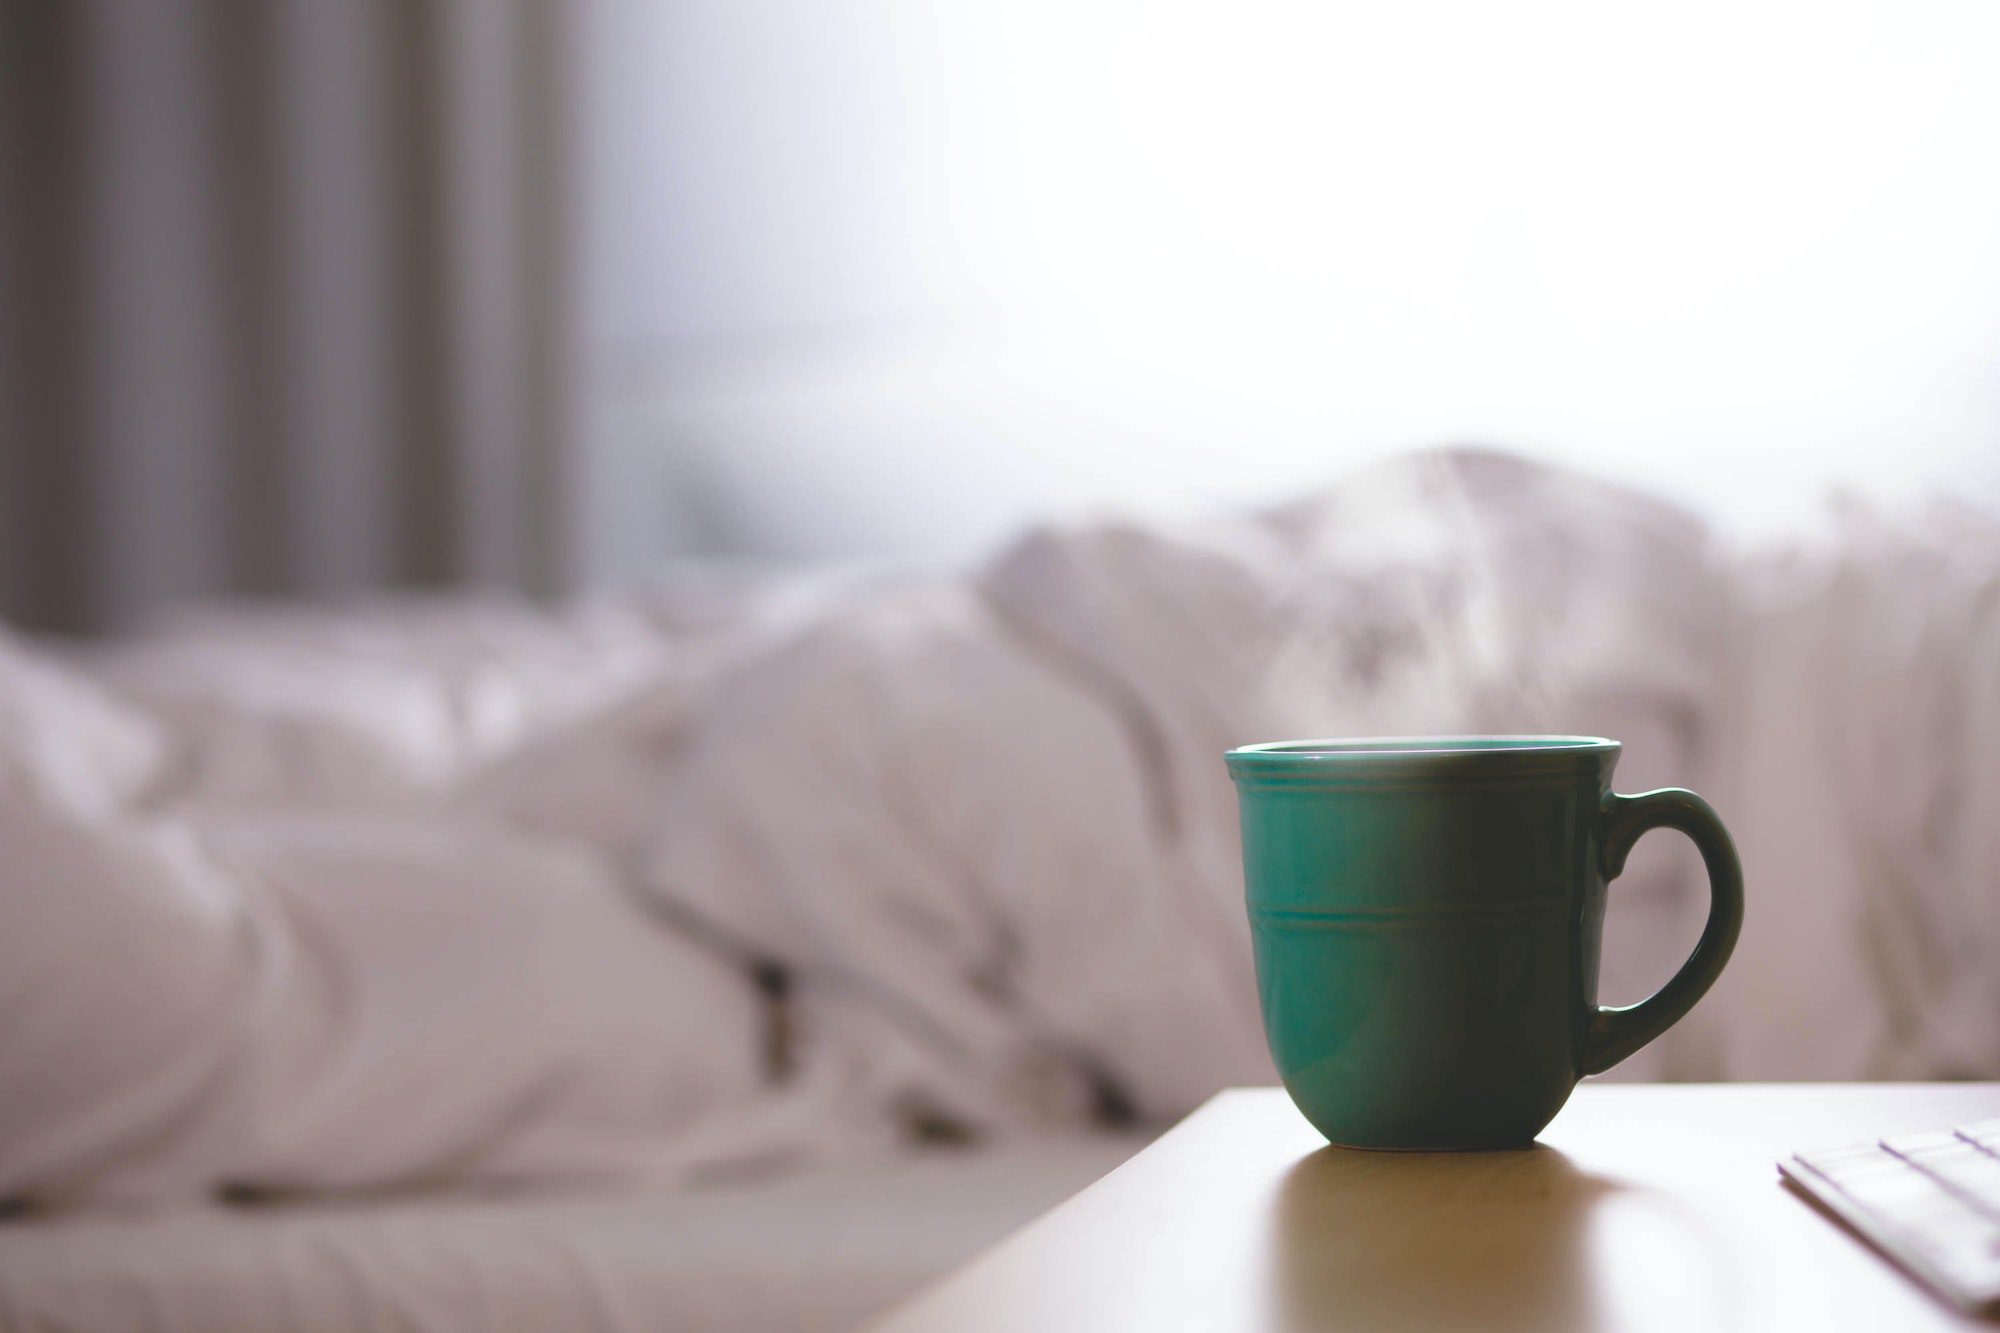 Hot cup of coffee near a bed